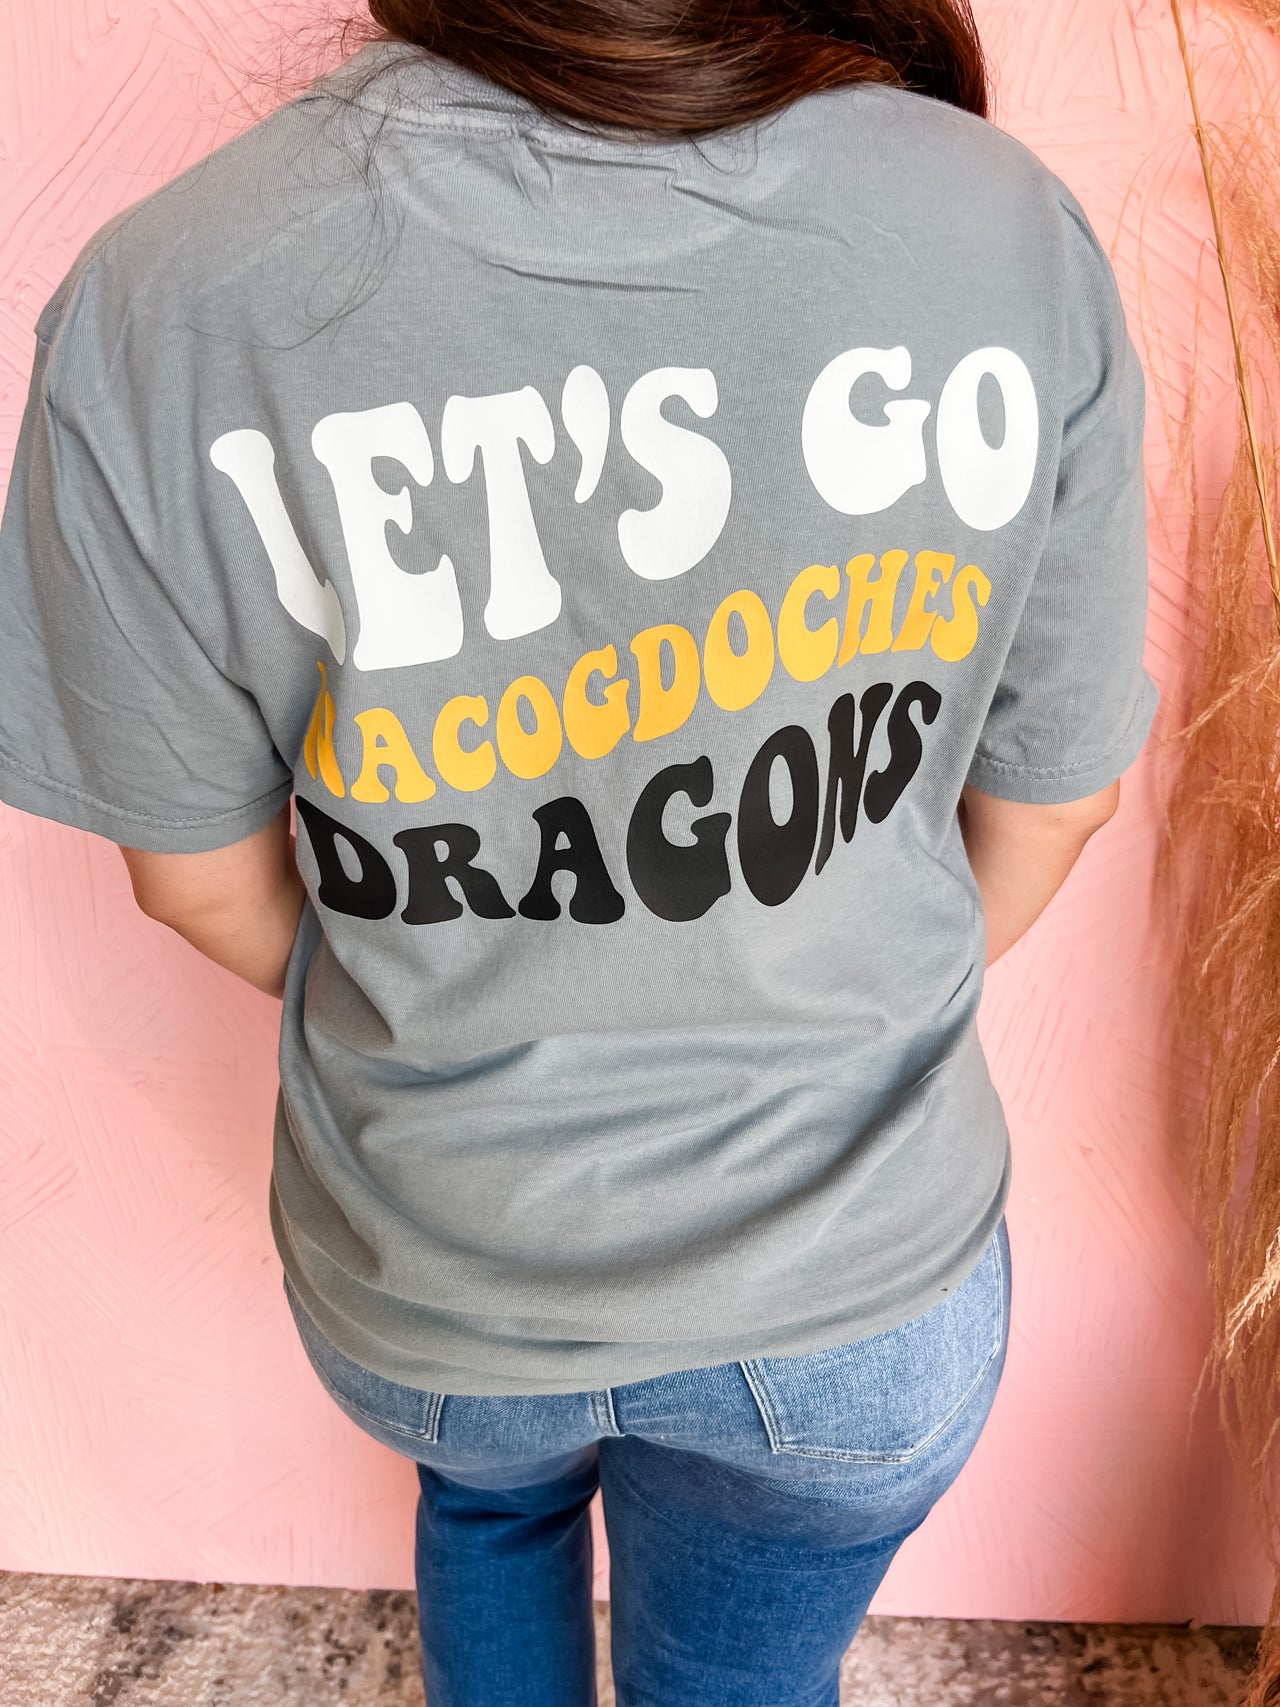 Let's Go Nacogdoches Dragons- Adult